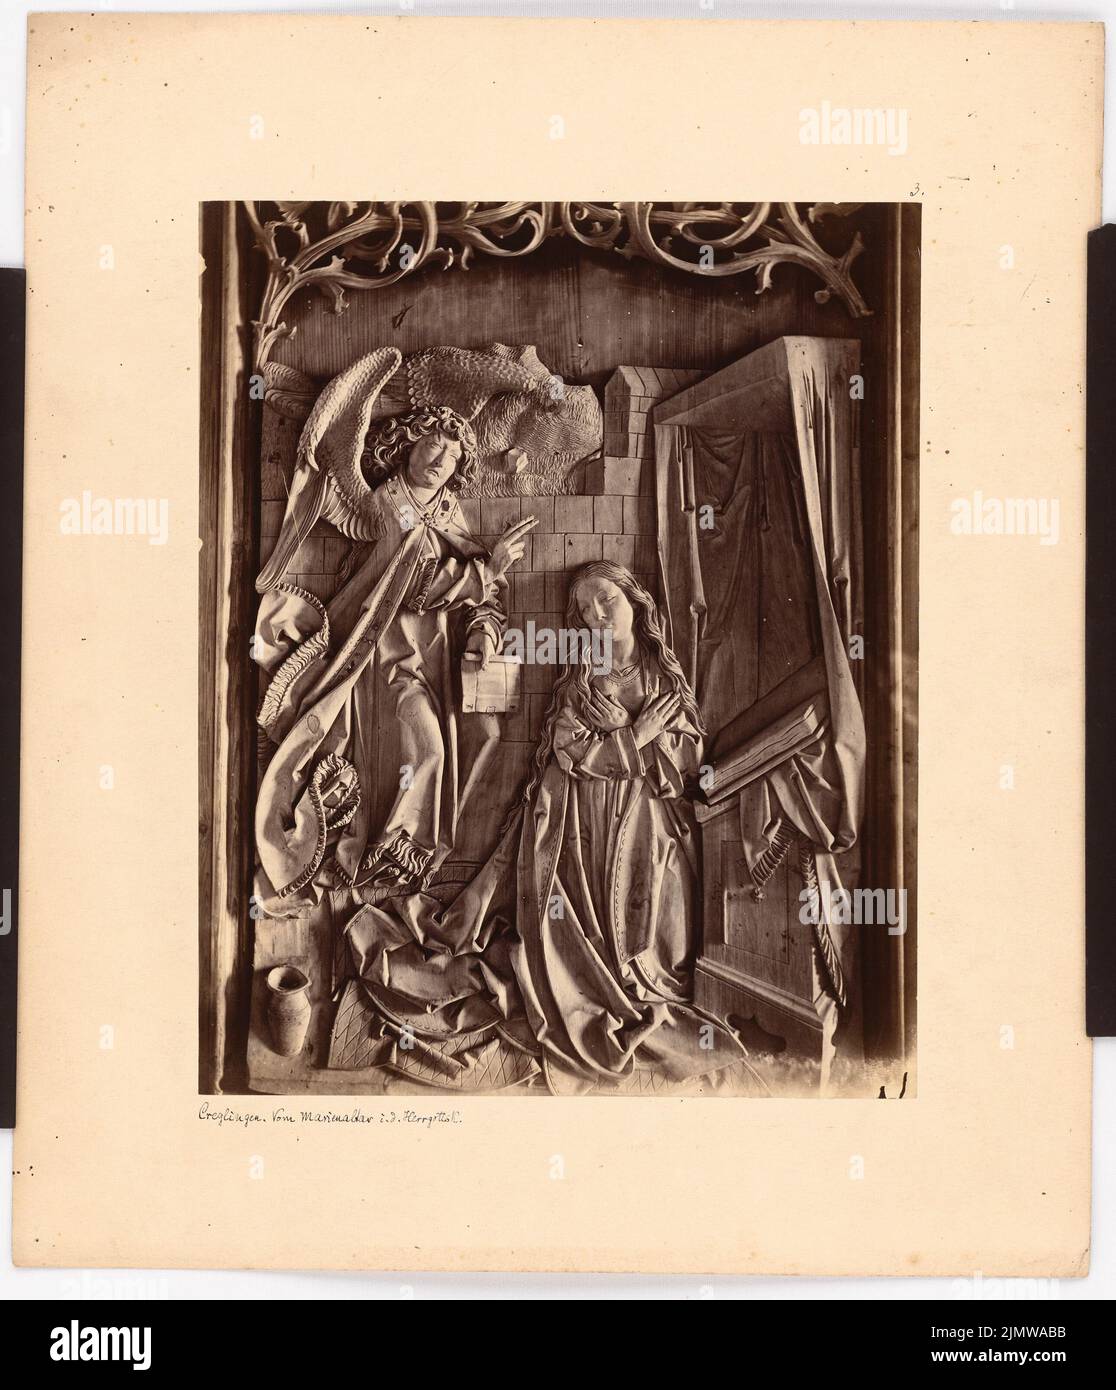 Unknown photographer, altar wing from the Herrgottskirche in Creglingen (without date): View of the lower inner panel from the left altar wing with the proclamation scene of the Marien altar by Tillmann Riemenschneider. Photo on paper, 38 x 32.6 cm (including scan edges) unbek. Künstler : Altarflügel aus der Herrgottskirche, Creglingen Stock Photo